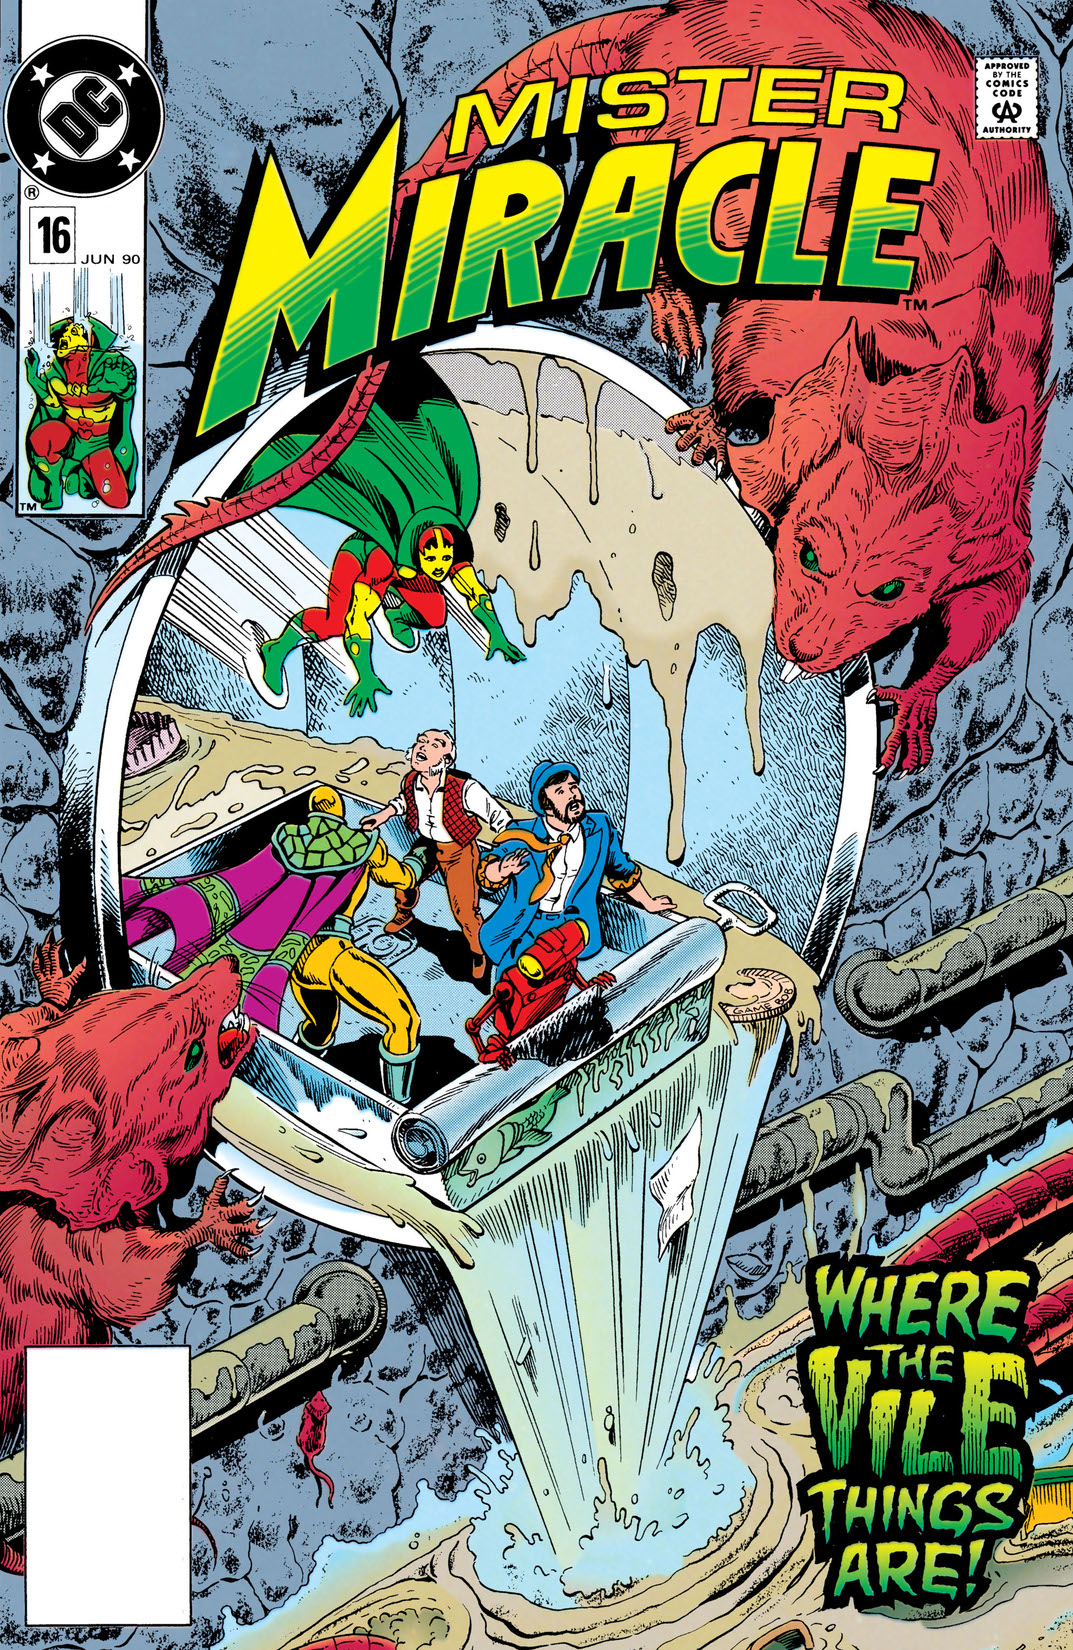 Mister Miracle (1988-) #16 preview images